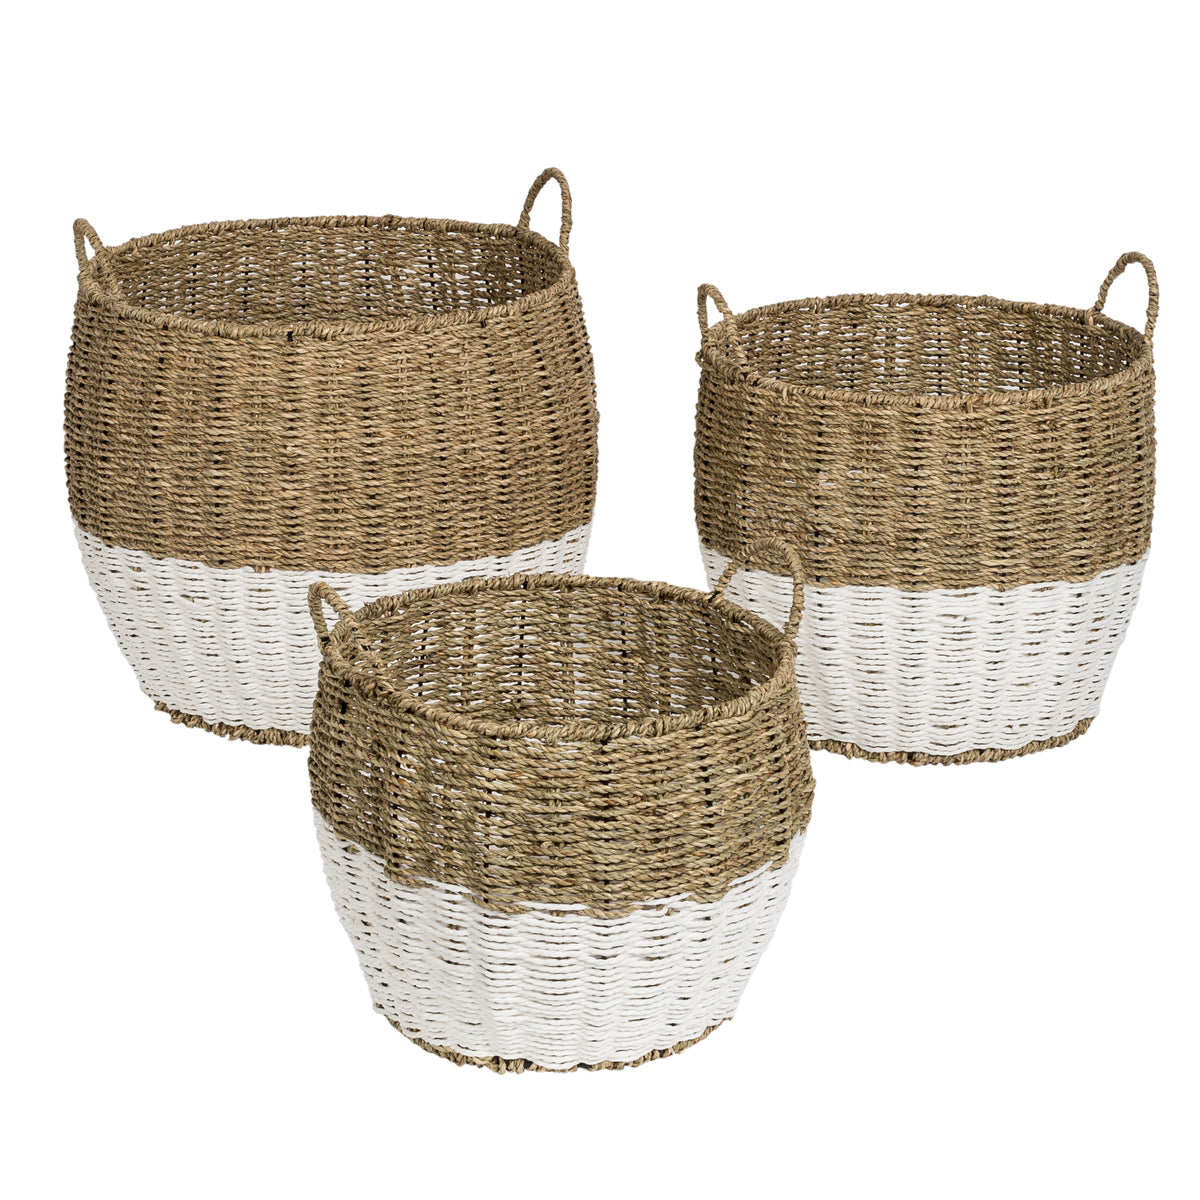 https://www.honeycansdo.shop/wp-content/uploads/1699/17/explore-our-white-natural-seagrass-round-nesting-baskets-set-of-3-honeycando-com-cheap-discount-online-collection-and-be-inspired-get-them-now_4.jpg